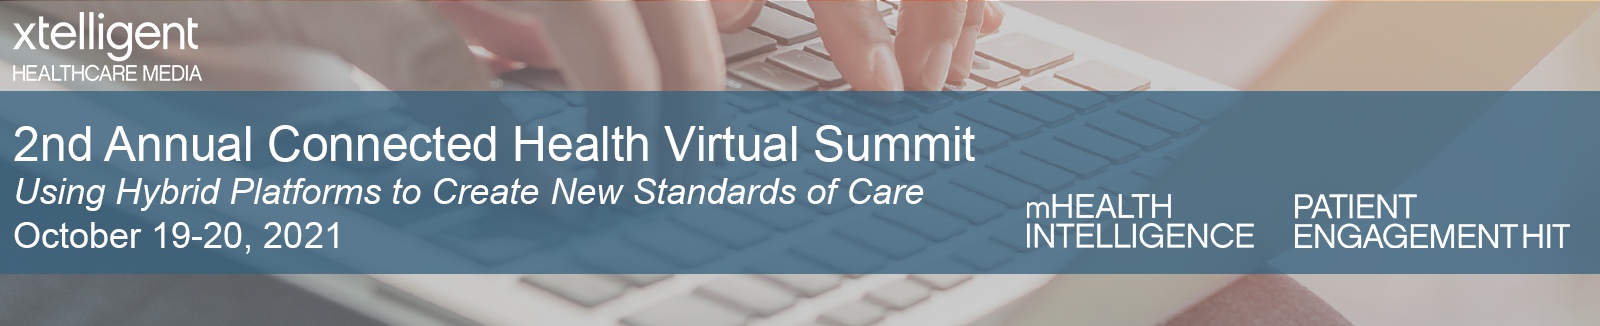 2nd Annual Connected Health Virtual Summit